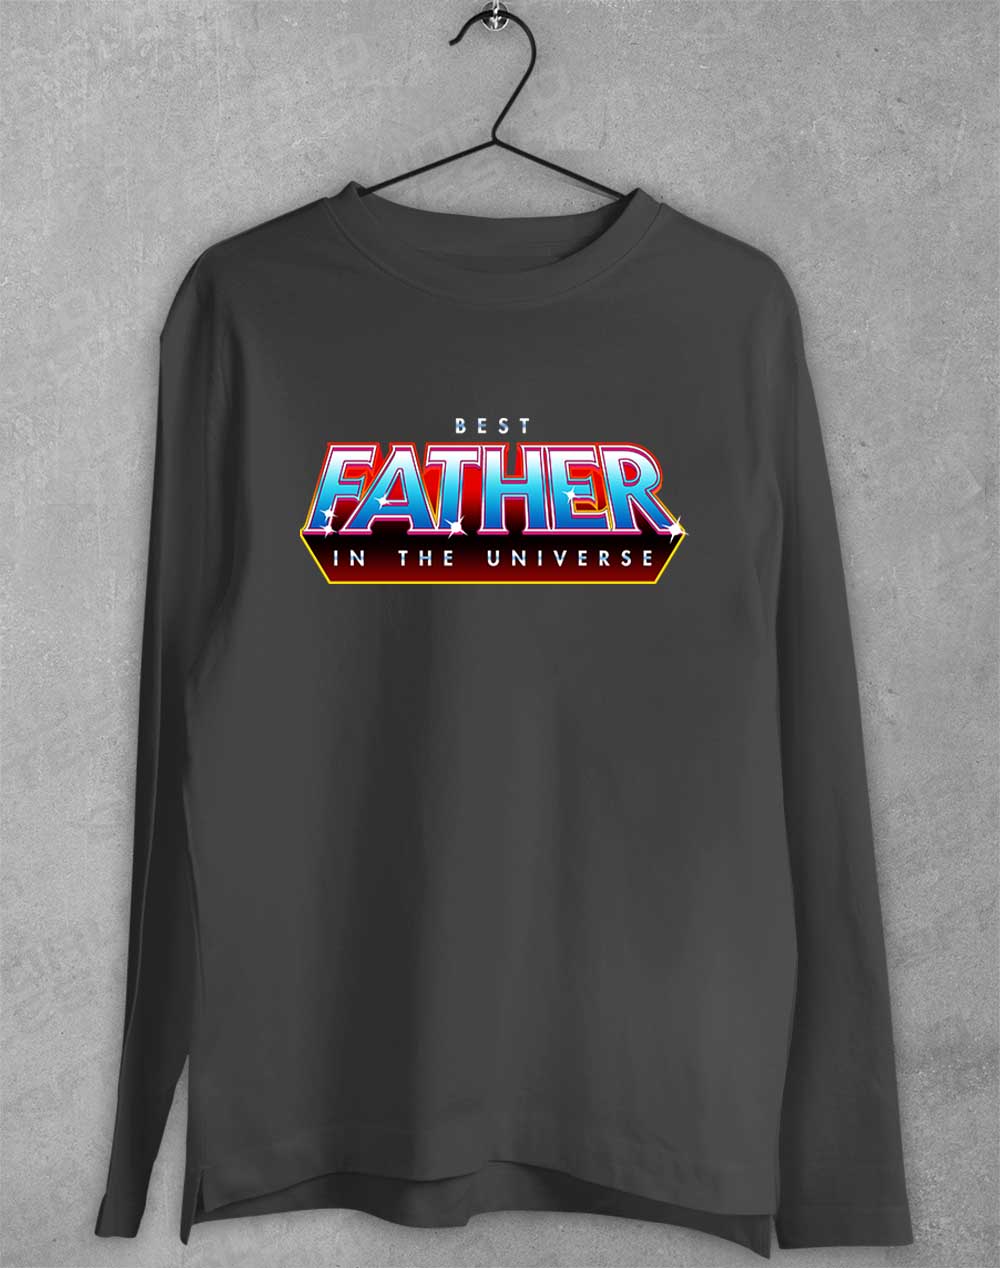 Charcoal - Best Father in the Universe Long Sleeve T-Shirt